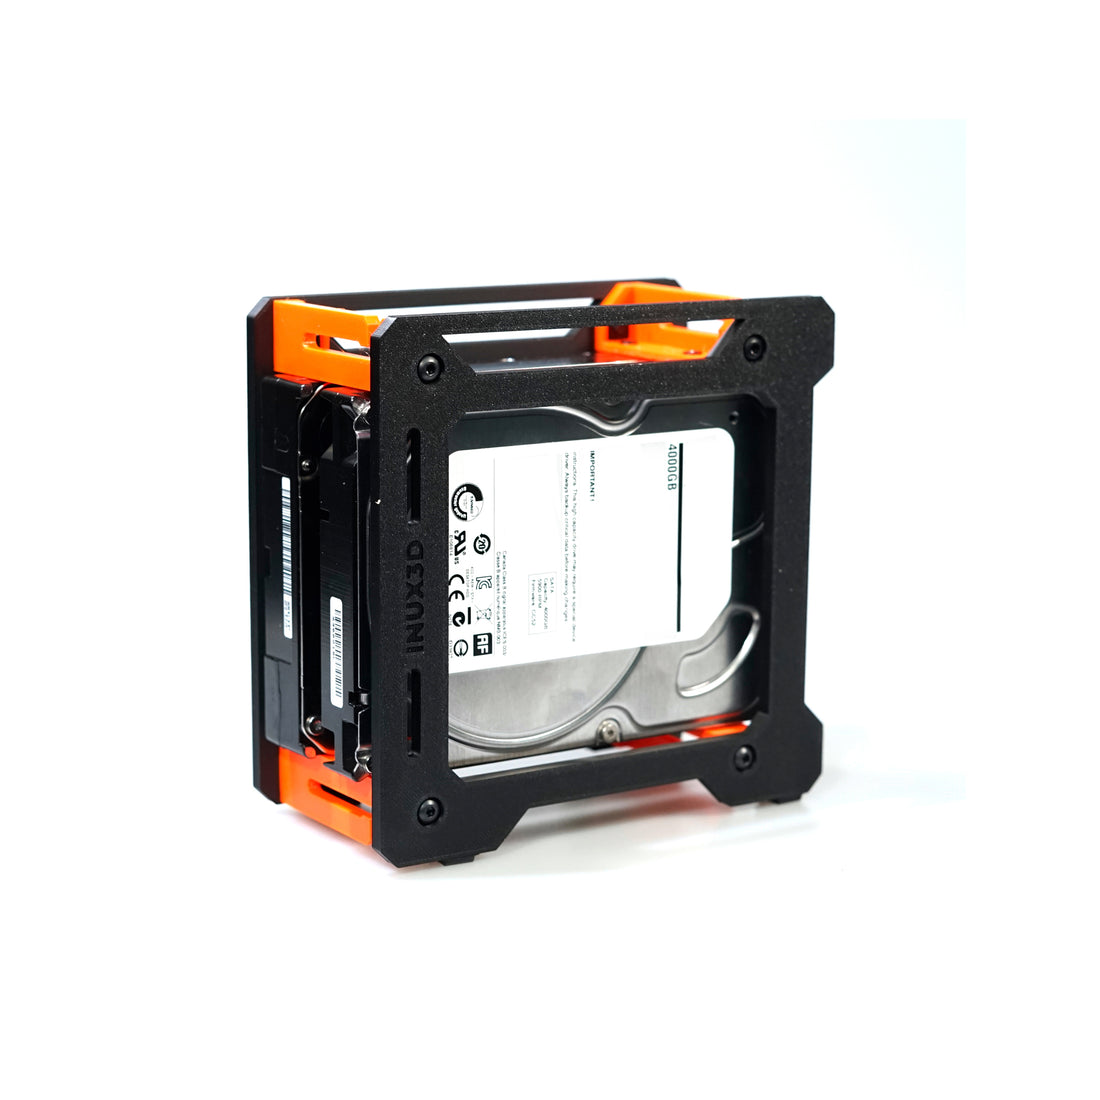 TerraPi Xtreme Duo Open Frame Case for Raspberry Pi and 2x 3.5" HDD Drives 3D STL Print File